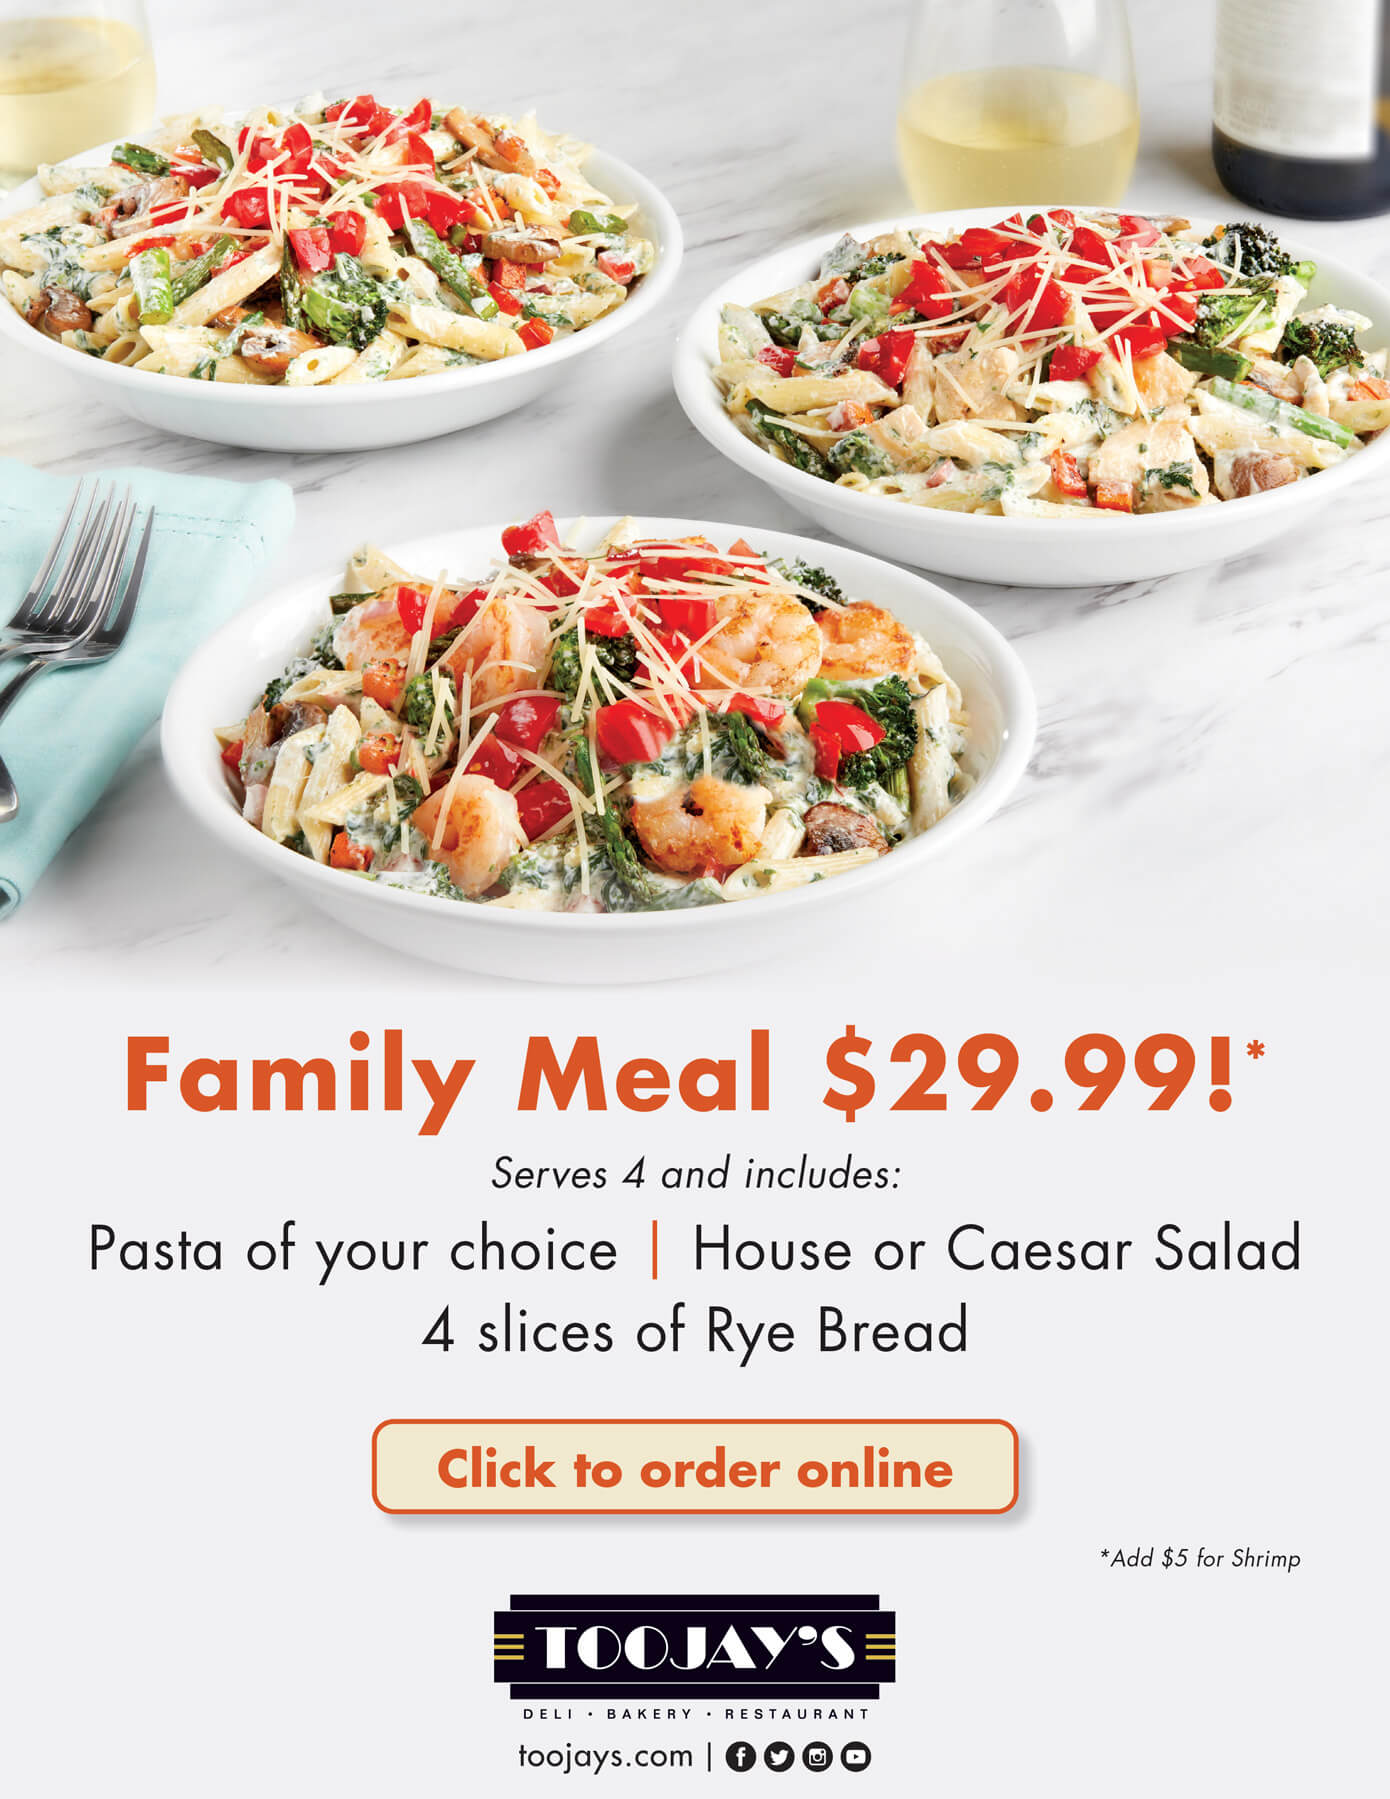 Family Meal $29.99! Serves 4 and includes: Pasta of your choice, house or caesar salad, or 4 slices rye bread.